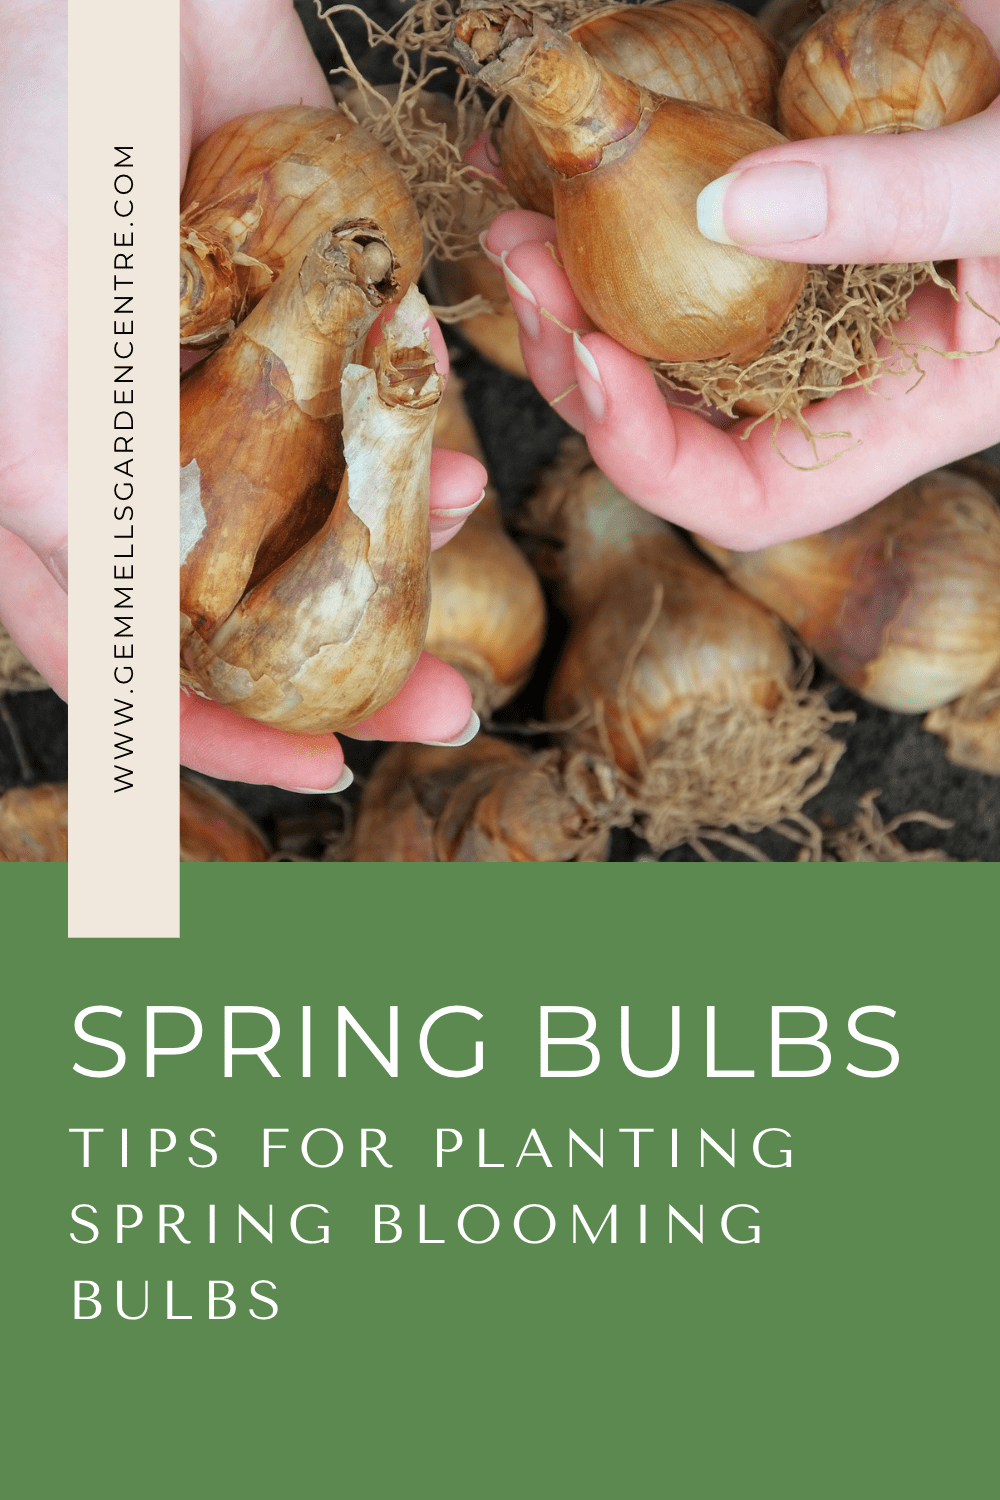 Tips for Planting Spring Blooming Bulbs 